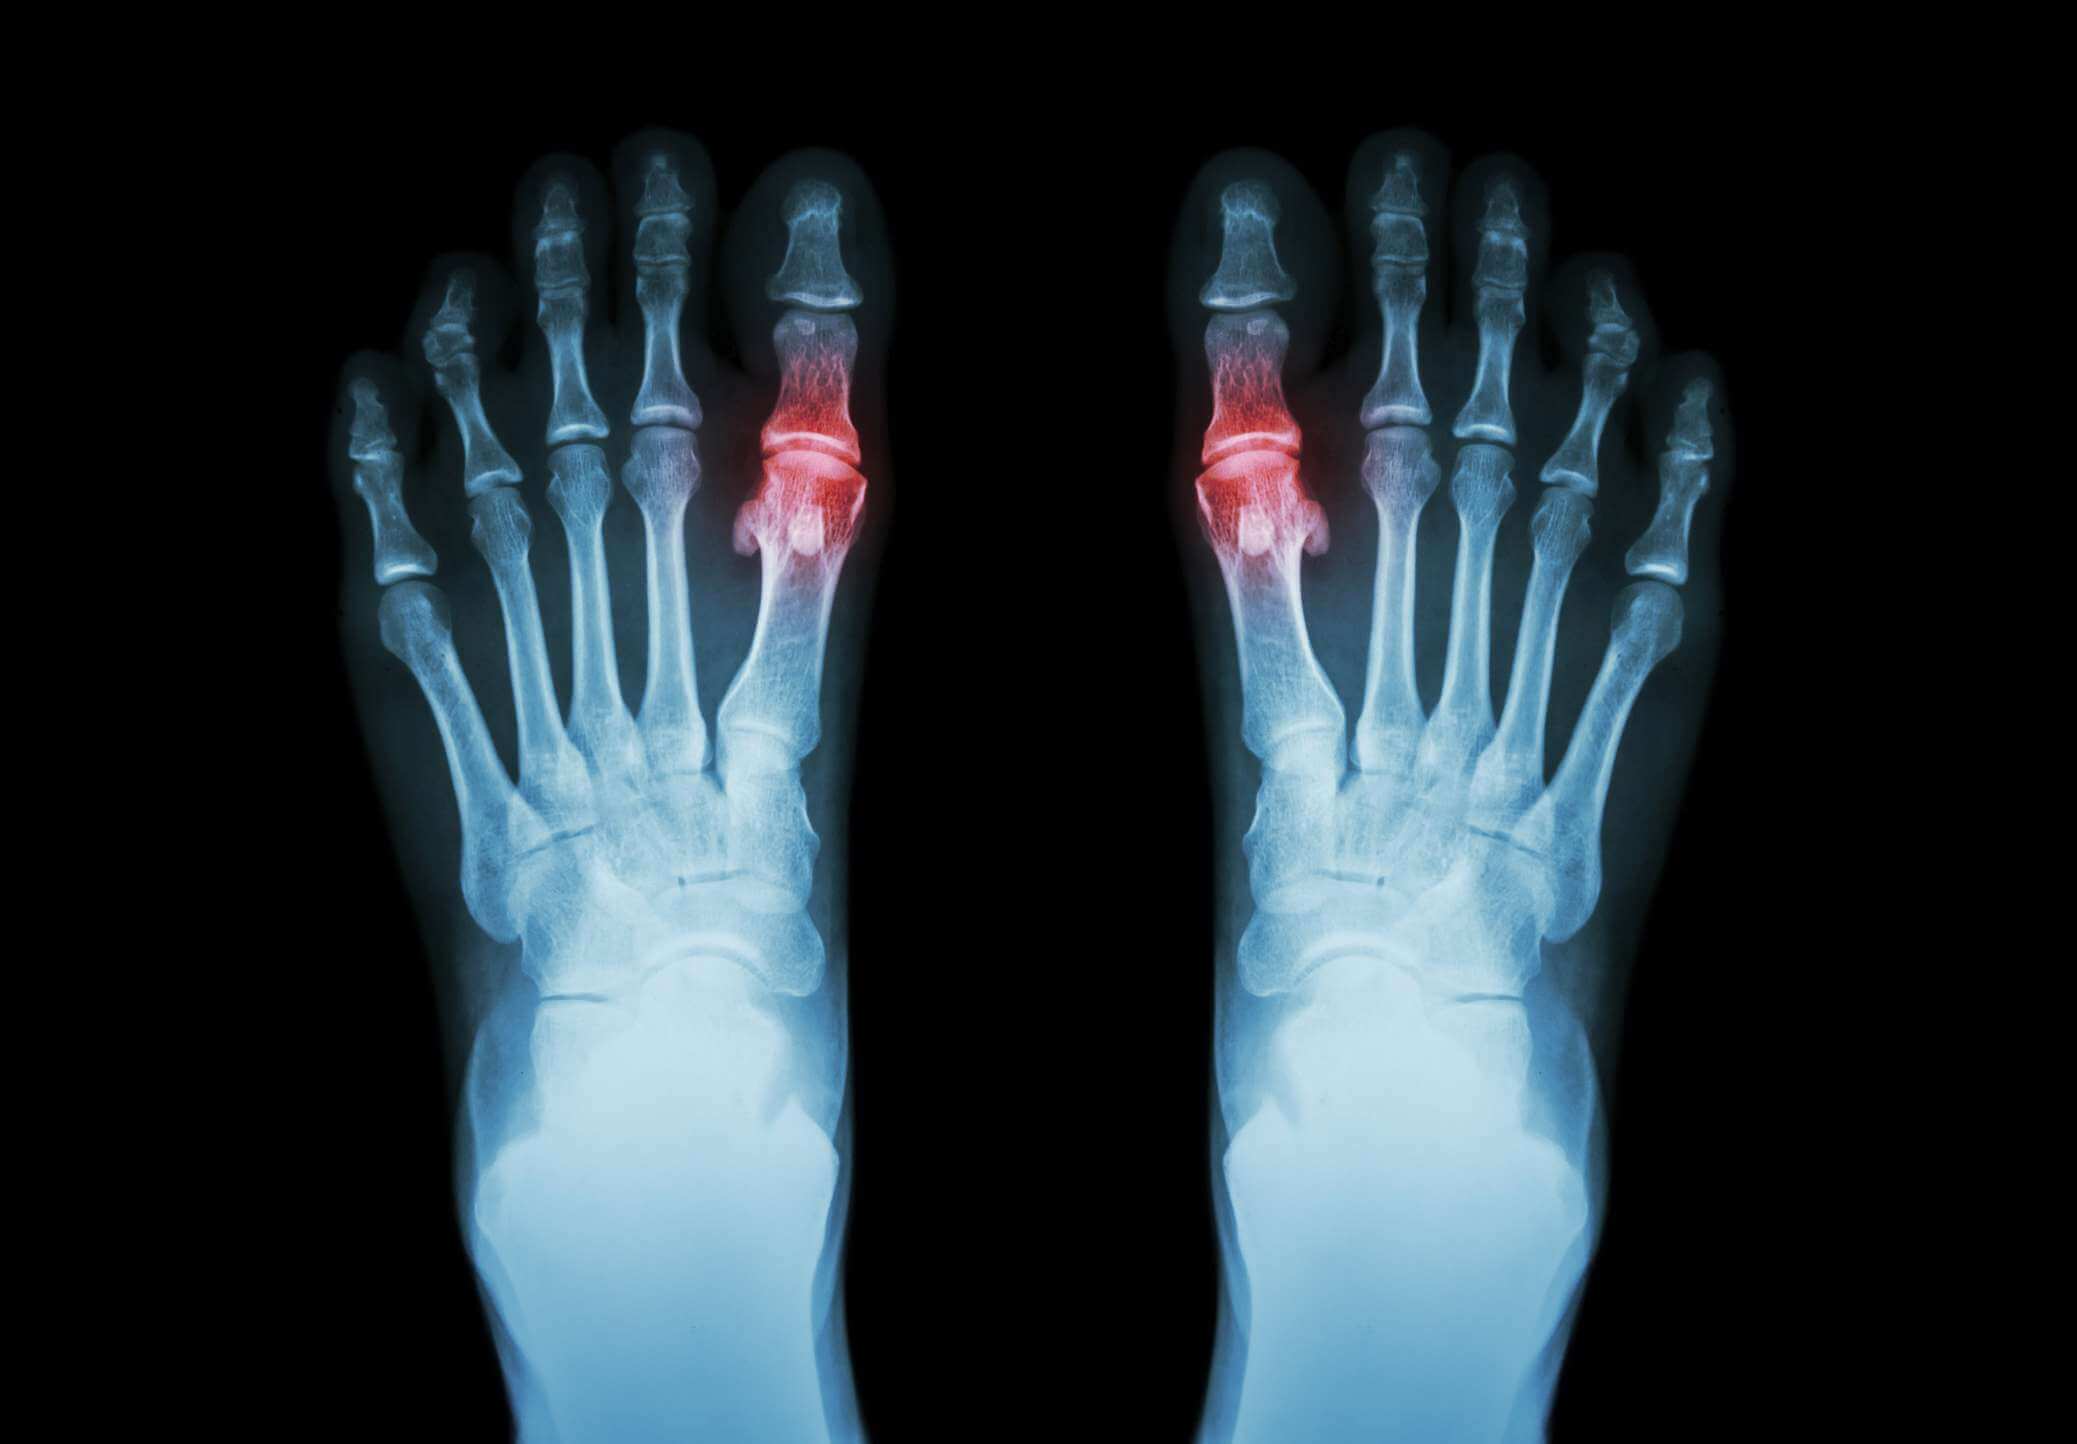 Imaging guidelines for gout and other crystalline joint diseases